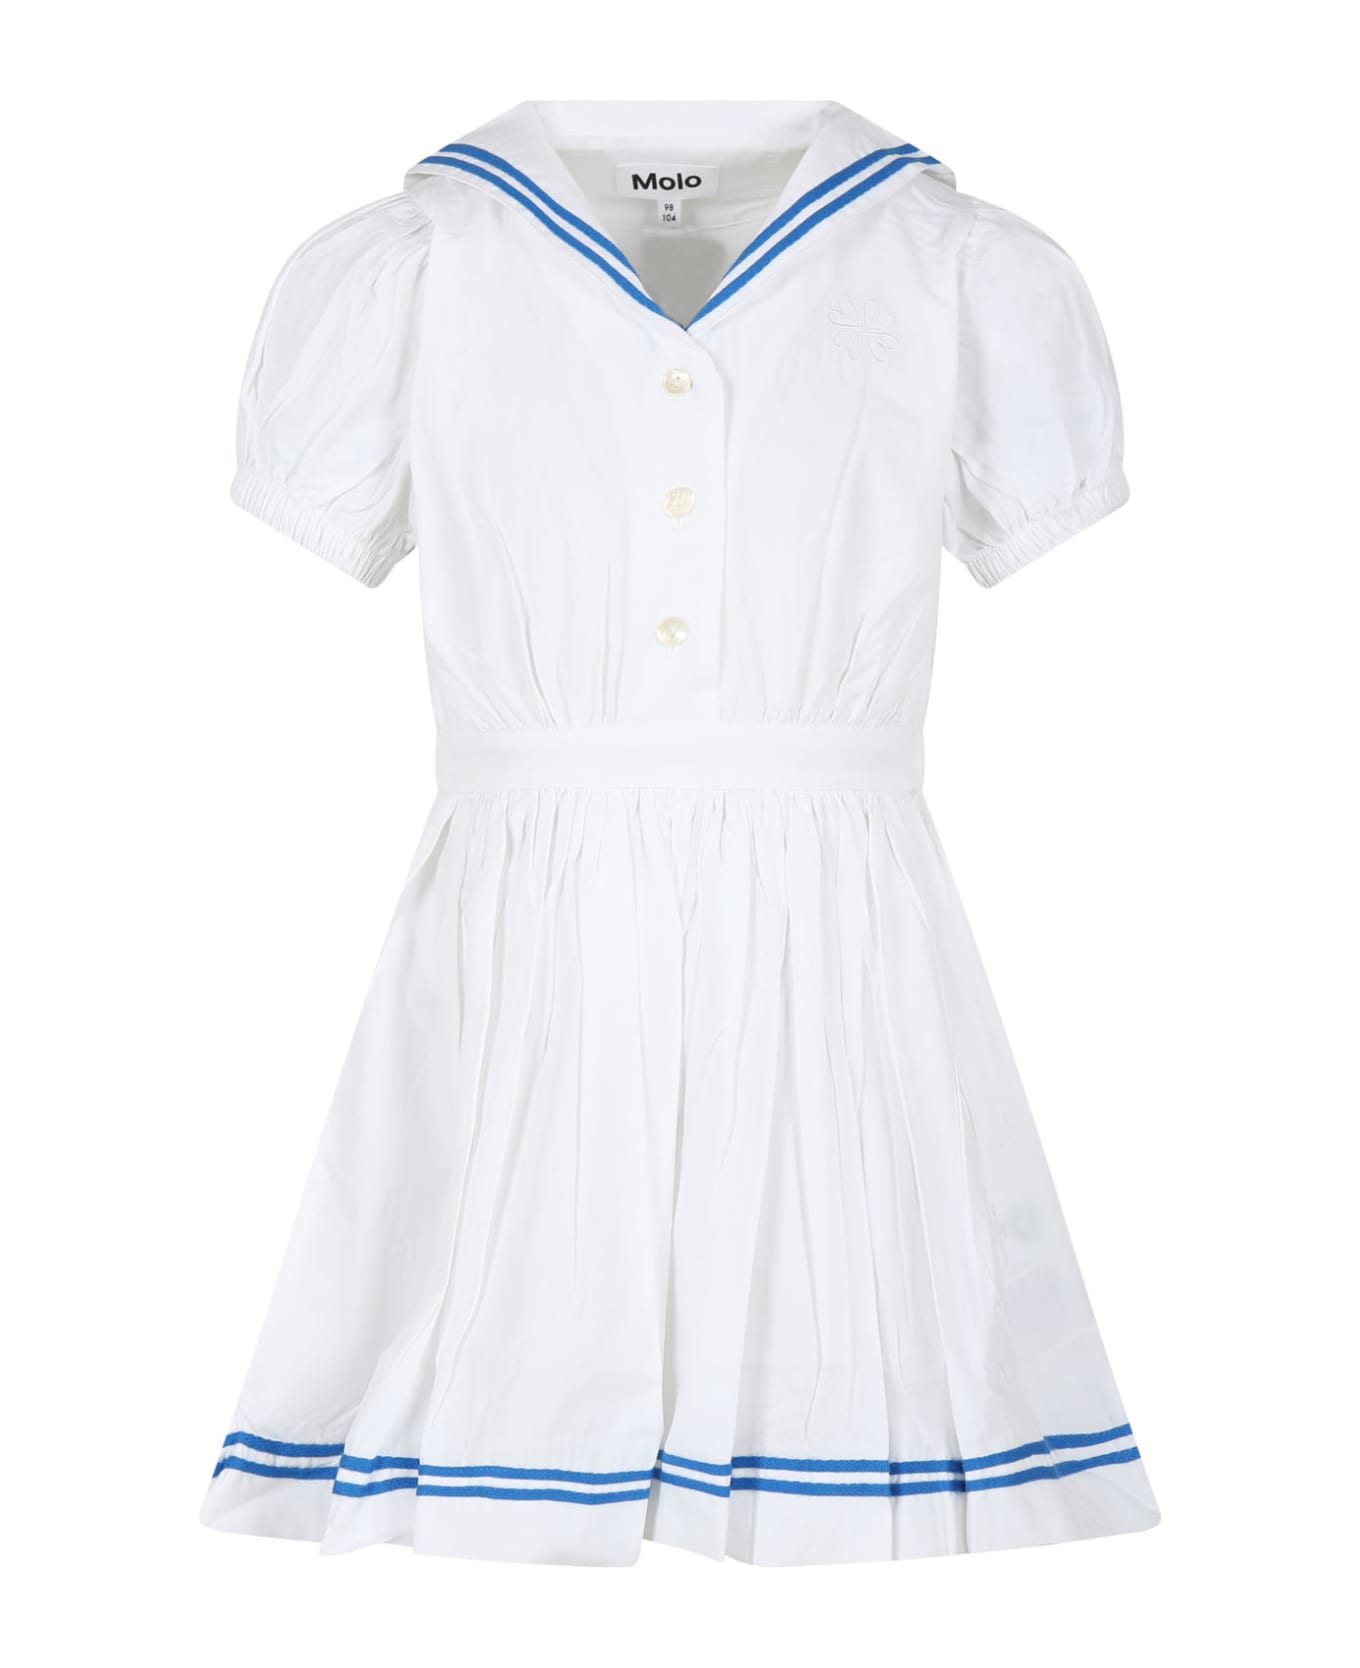 Molo White Dress For Girl With Embroidery - White